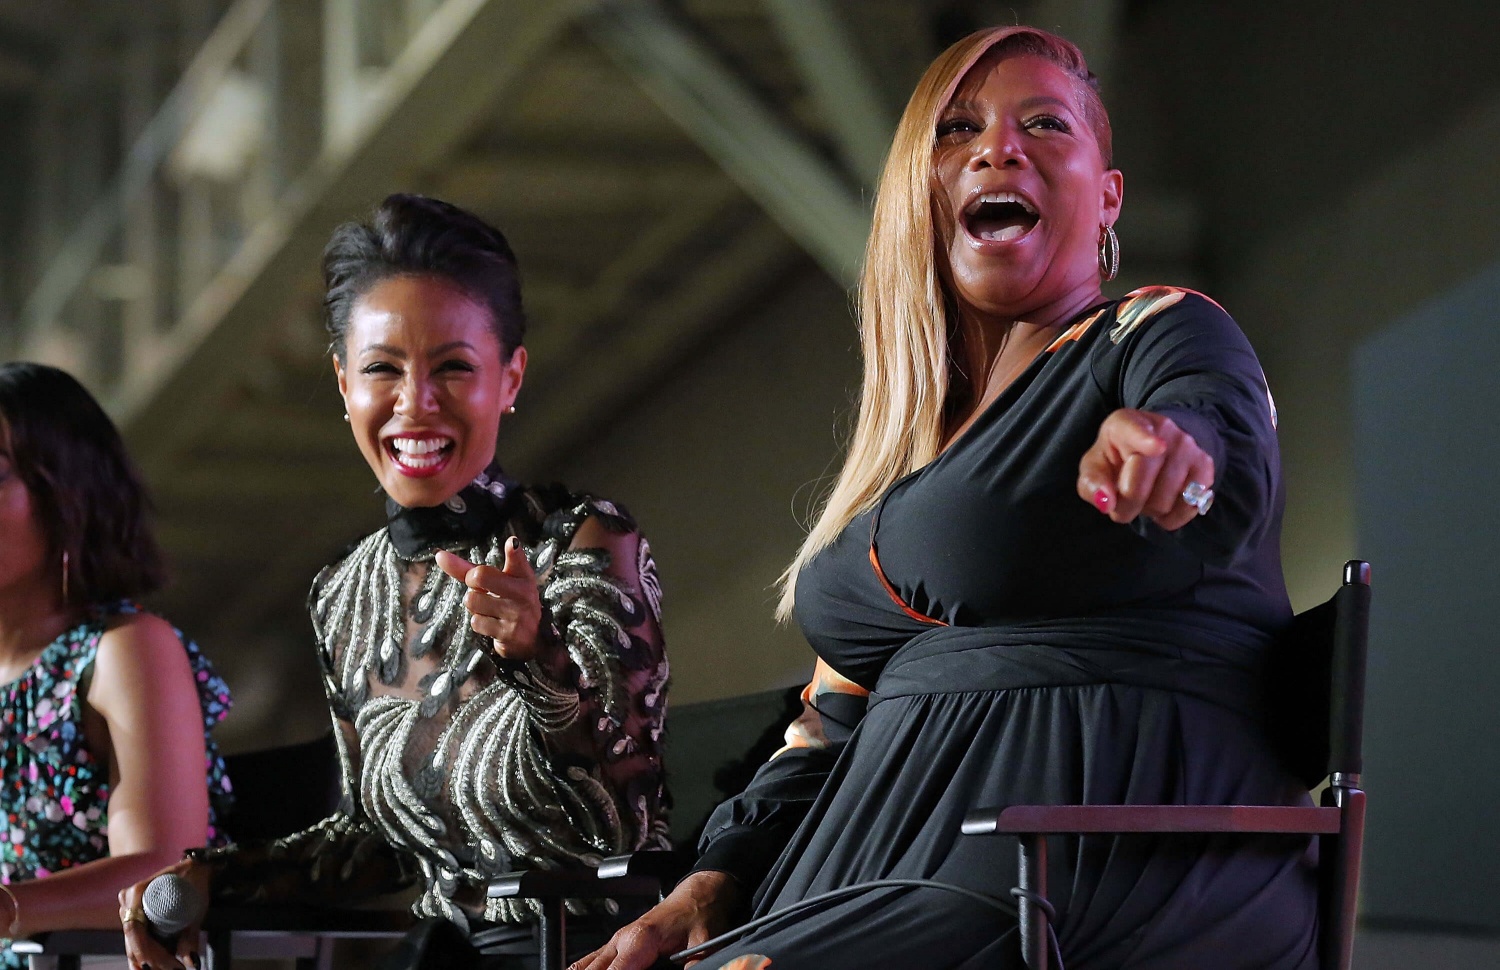 Jada Pinkett Smith, left, Queen Latifah from the movie Girls Trips speak during the Essence Music Festival at the Ernest N. Morial Convention Center on July 1, 2017 in New Orleans, Louisiana. (Photo by Jonathan Bachman/Getty Images for Universal)